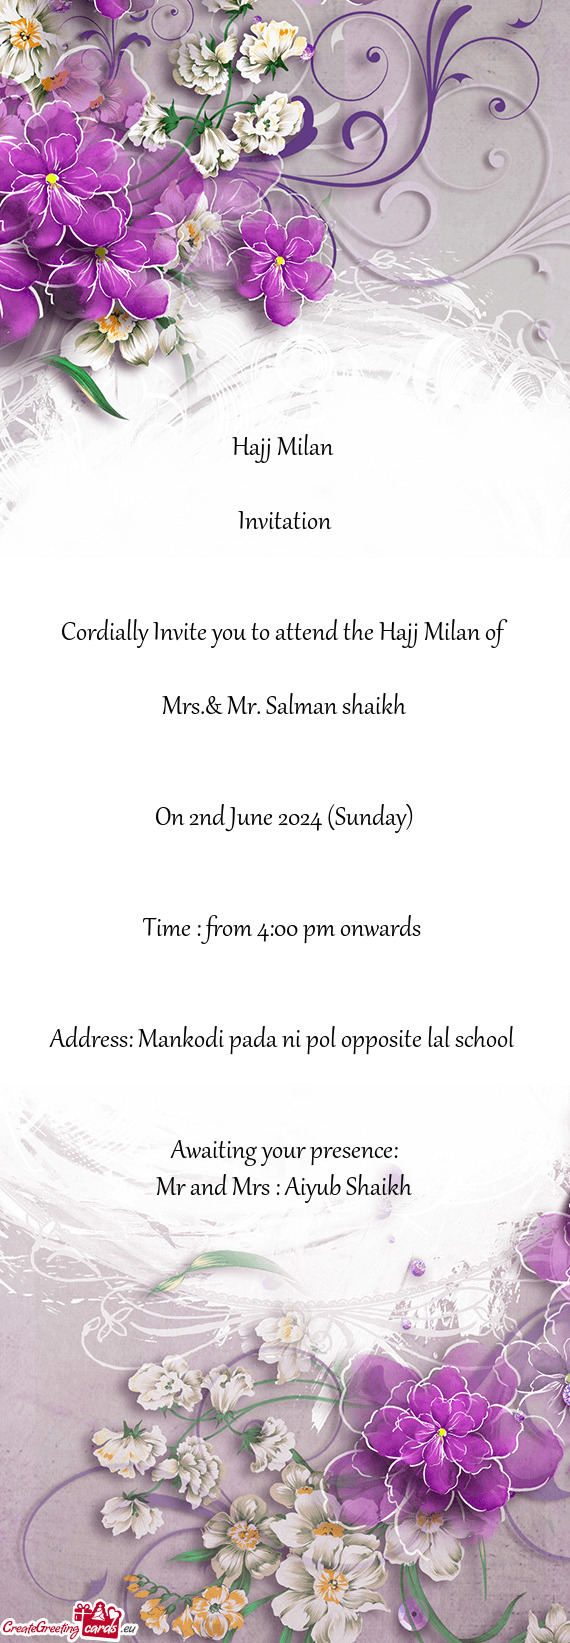 Cordially Invite you to attend the Hajj Milan of